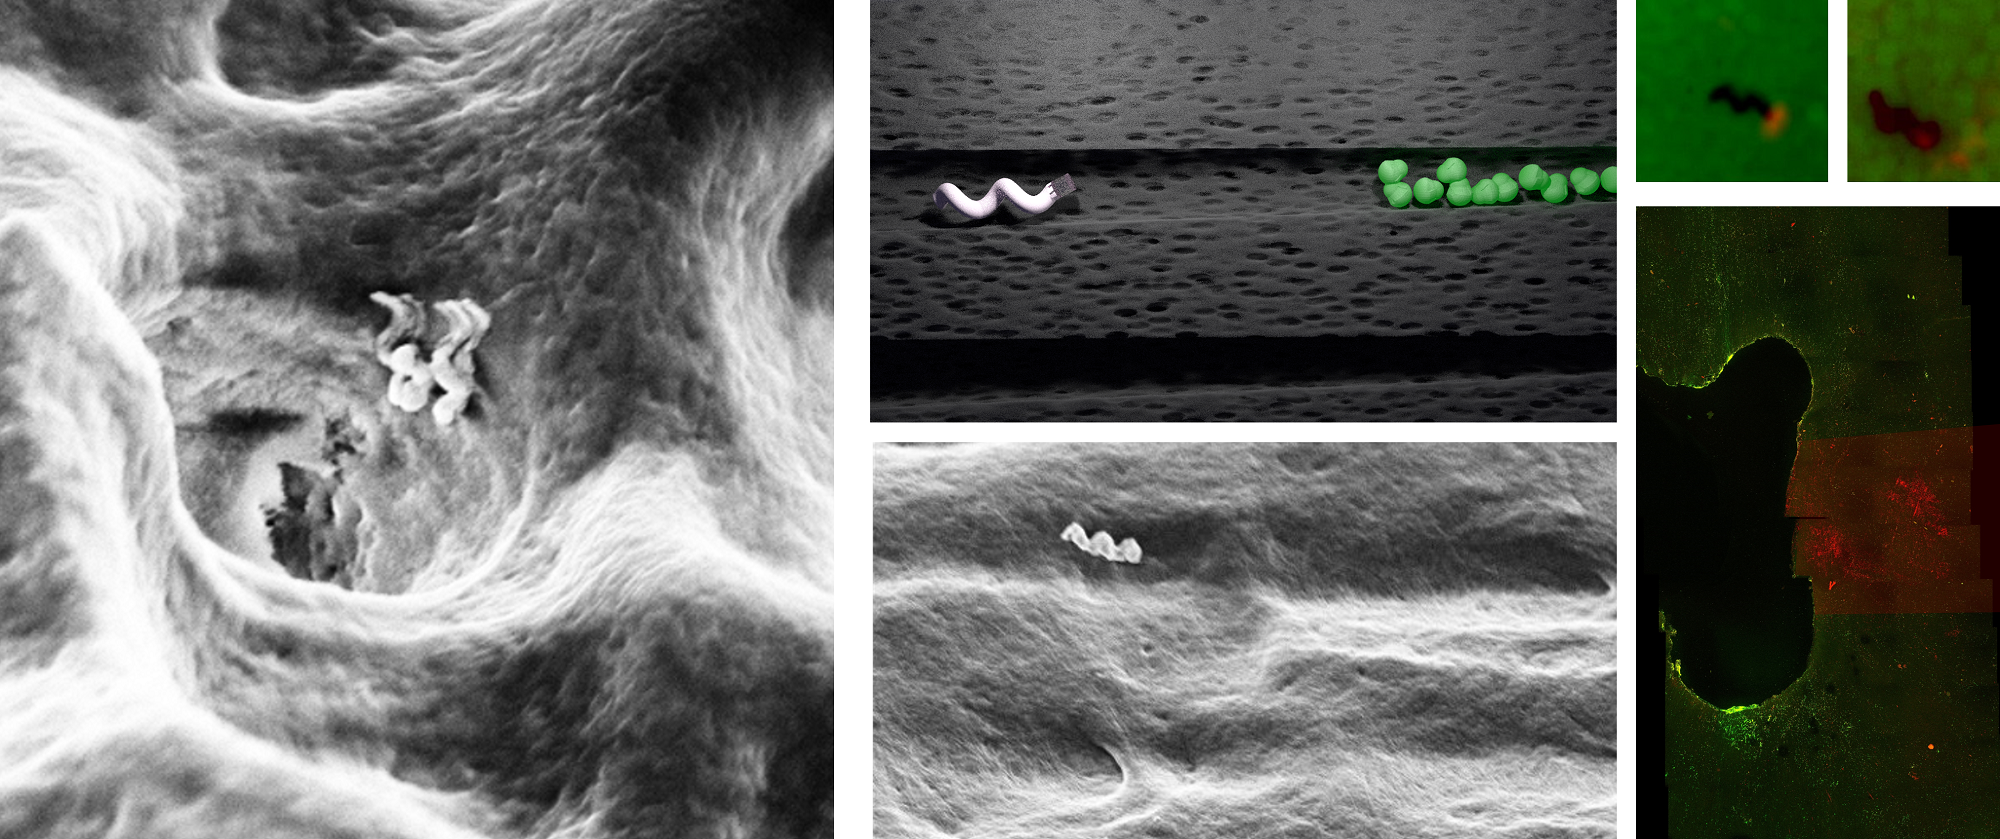 Researchers Develop Nanobot That Can Assist In Accurate Root Canal Treatments.